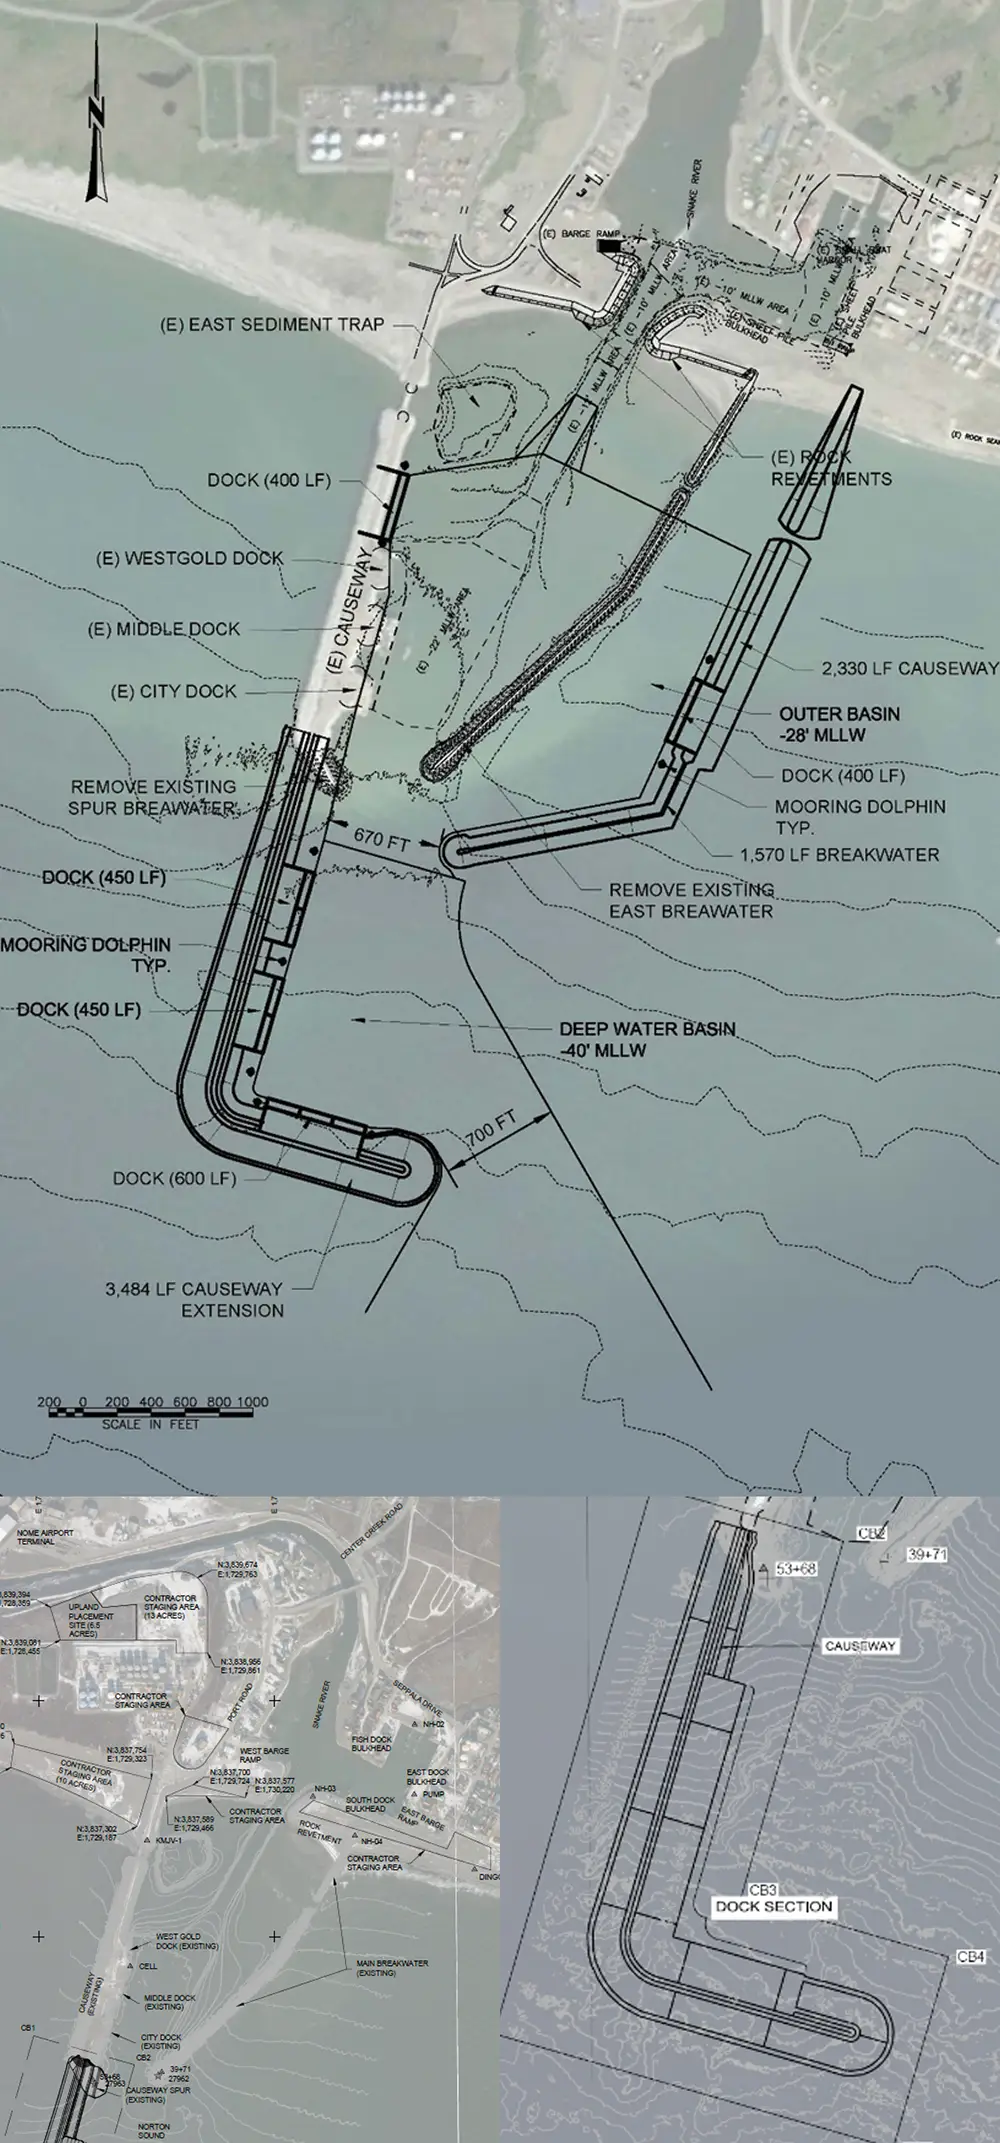 Maps and diagrams of proposed Port of Nome modifications